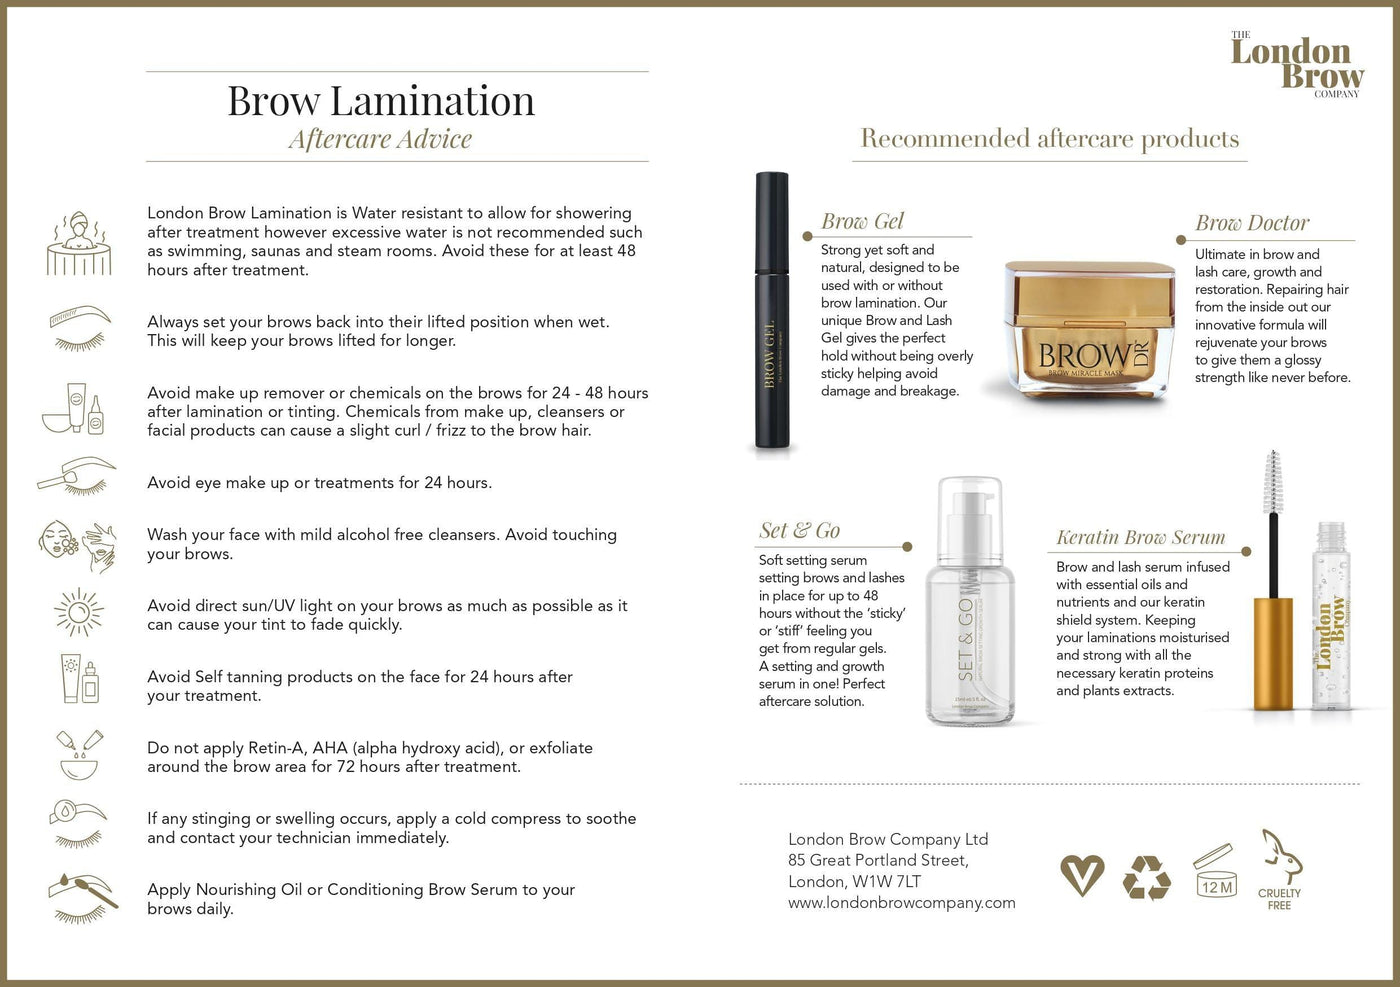 London Brow Lamination Client Aftercare Instruction Leaflet - The London Brow Company